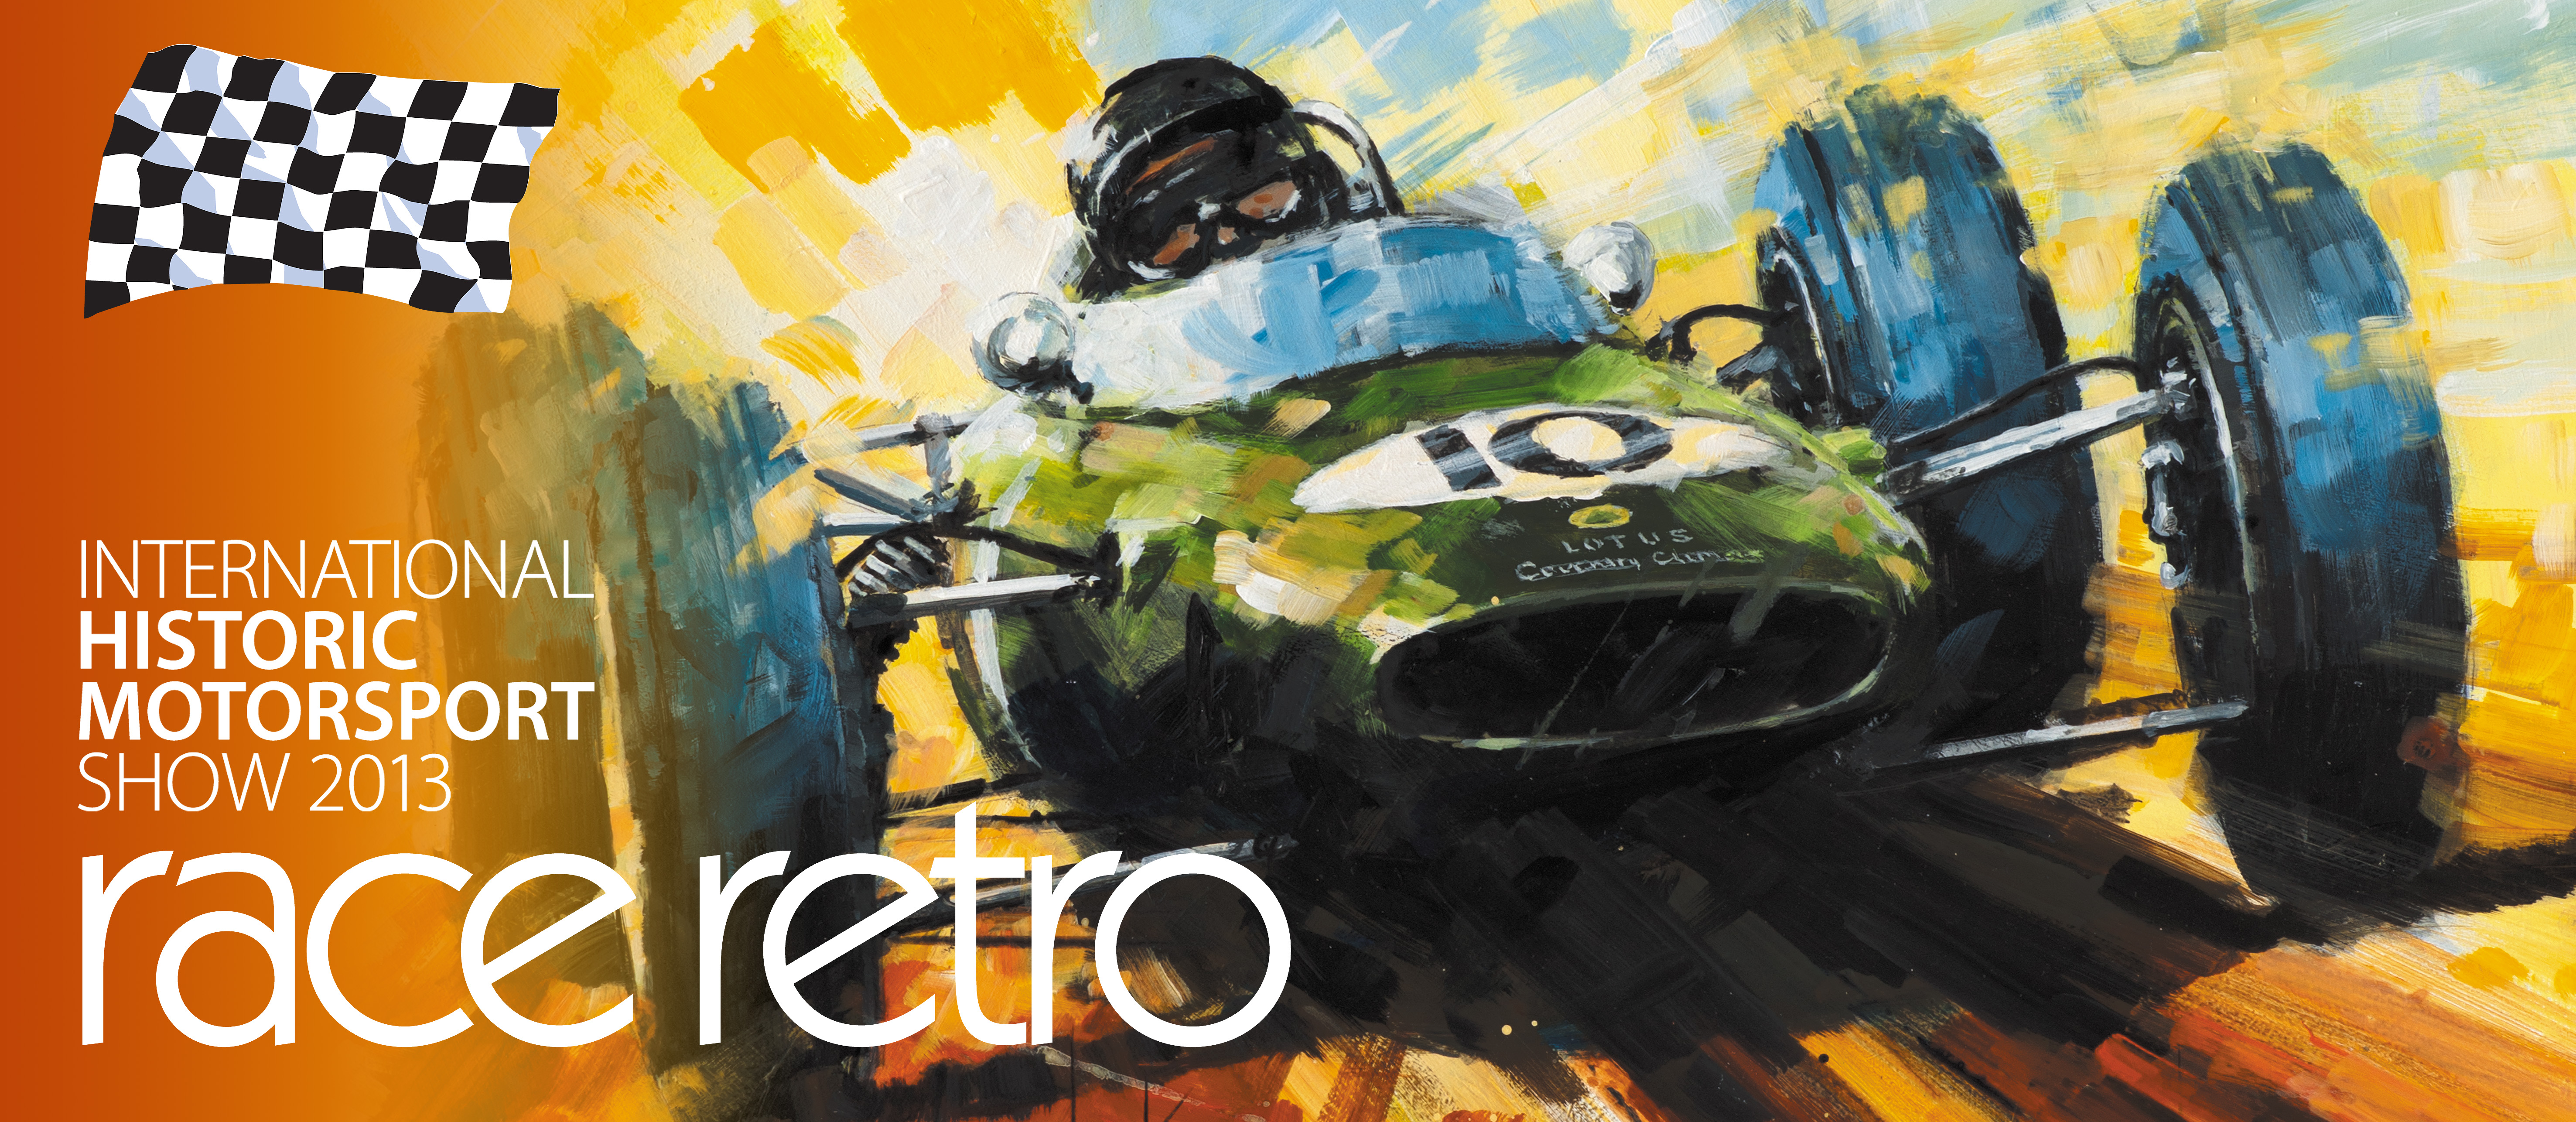 Race Retro 2013 : Discount Tickets for International Historic Motorsport Show cover